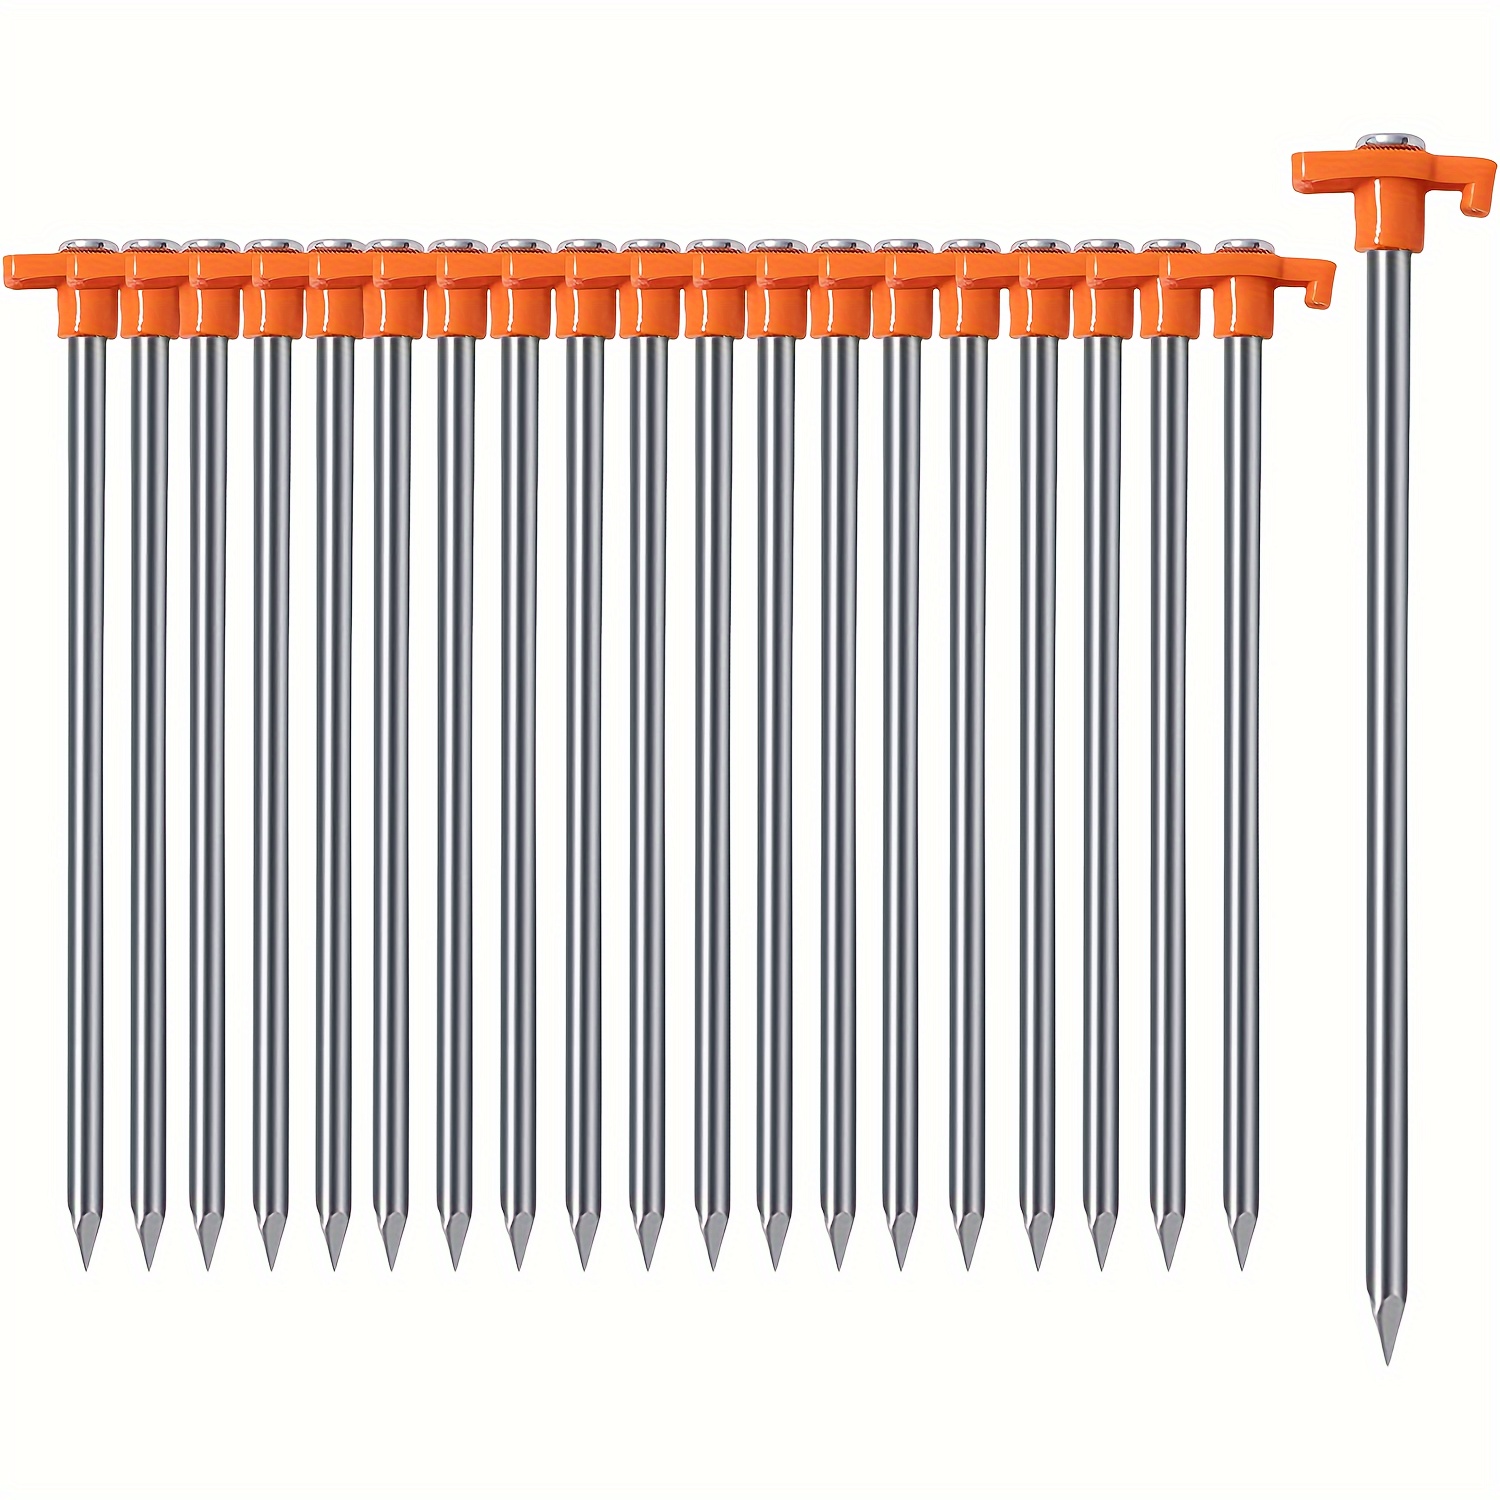 

20pcs Heavy Duty Tent Stakes, Metal Tent Pegs Ground Stakes, For Outdoor Camping, Patio, Garden, Canopies